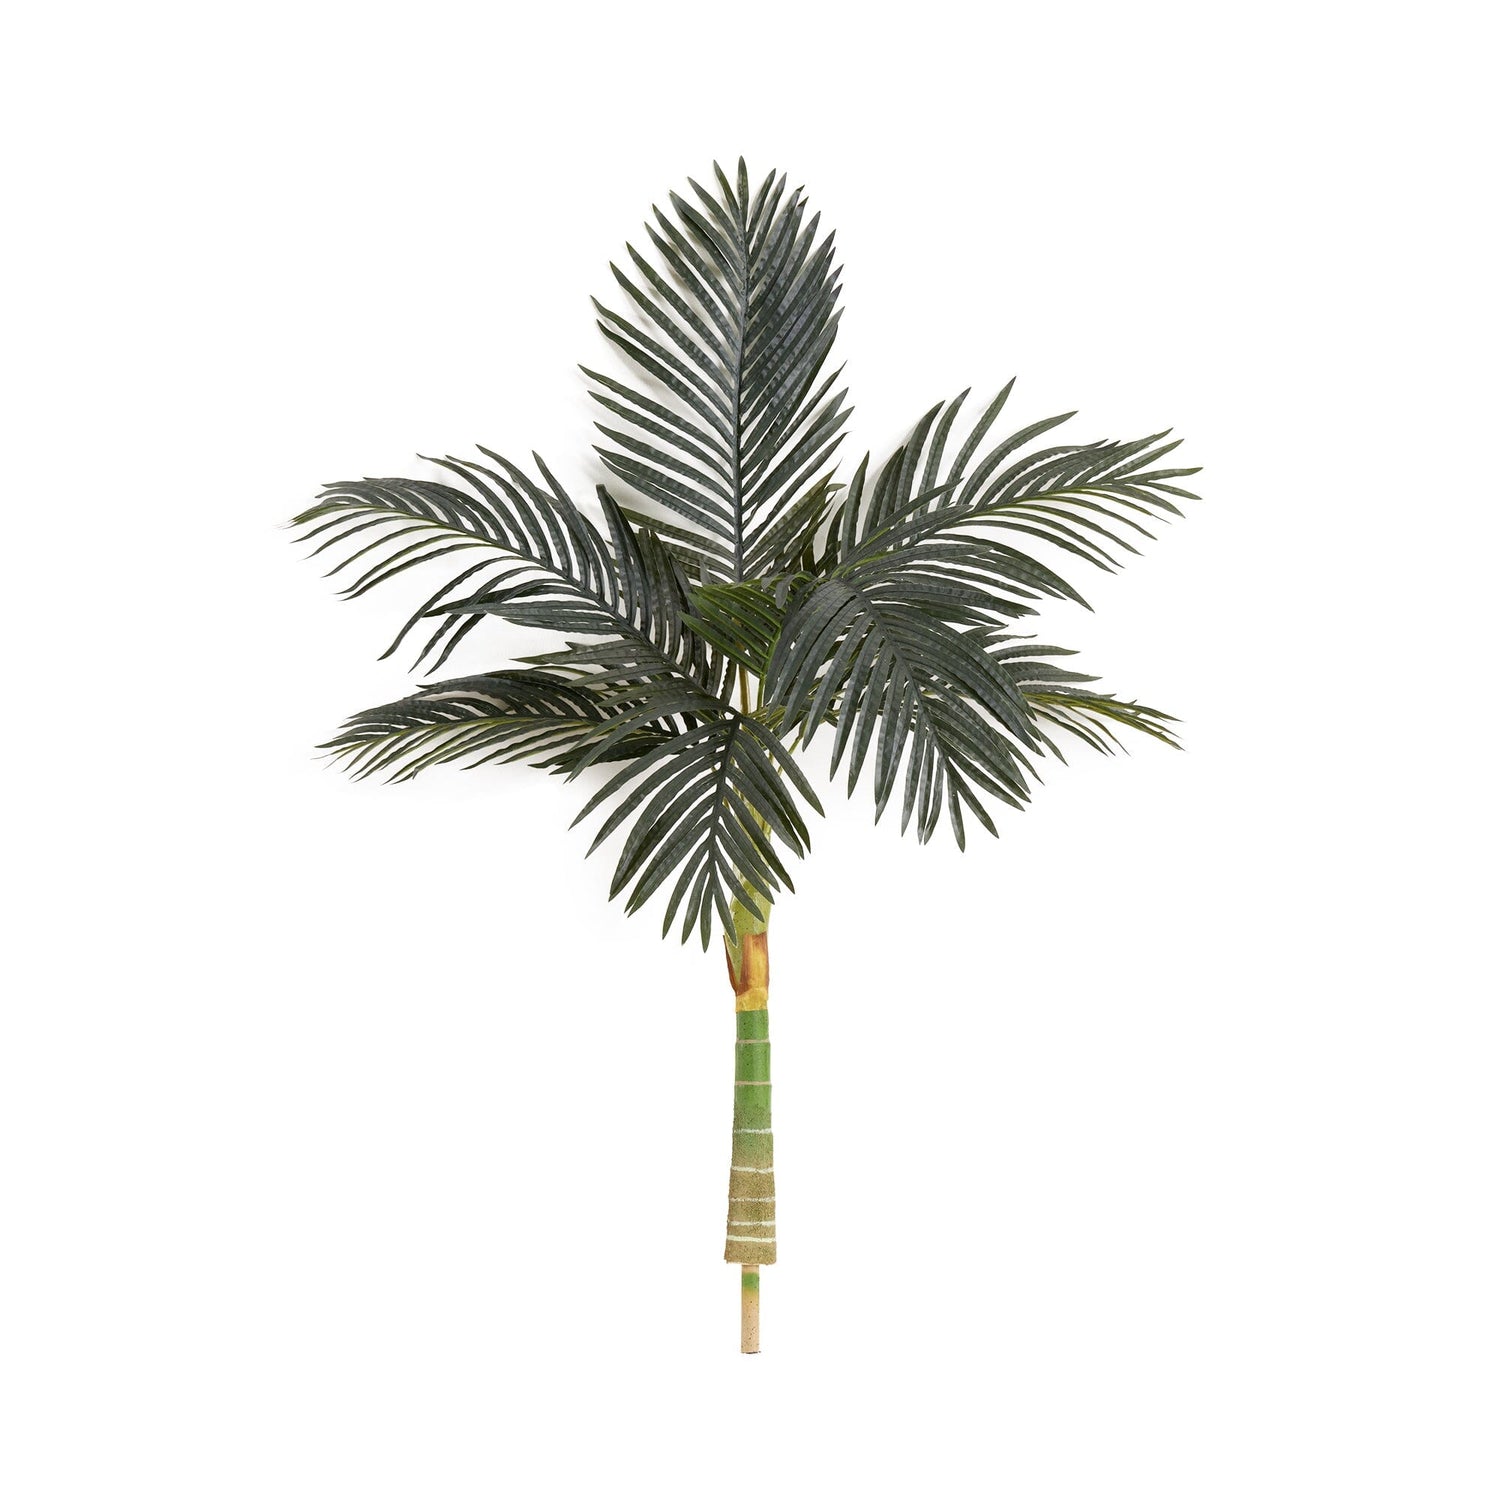 4’ Artificial Golden Cane Palm Tree Without Pot